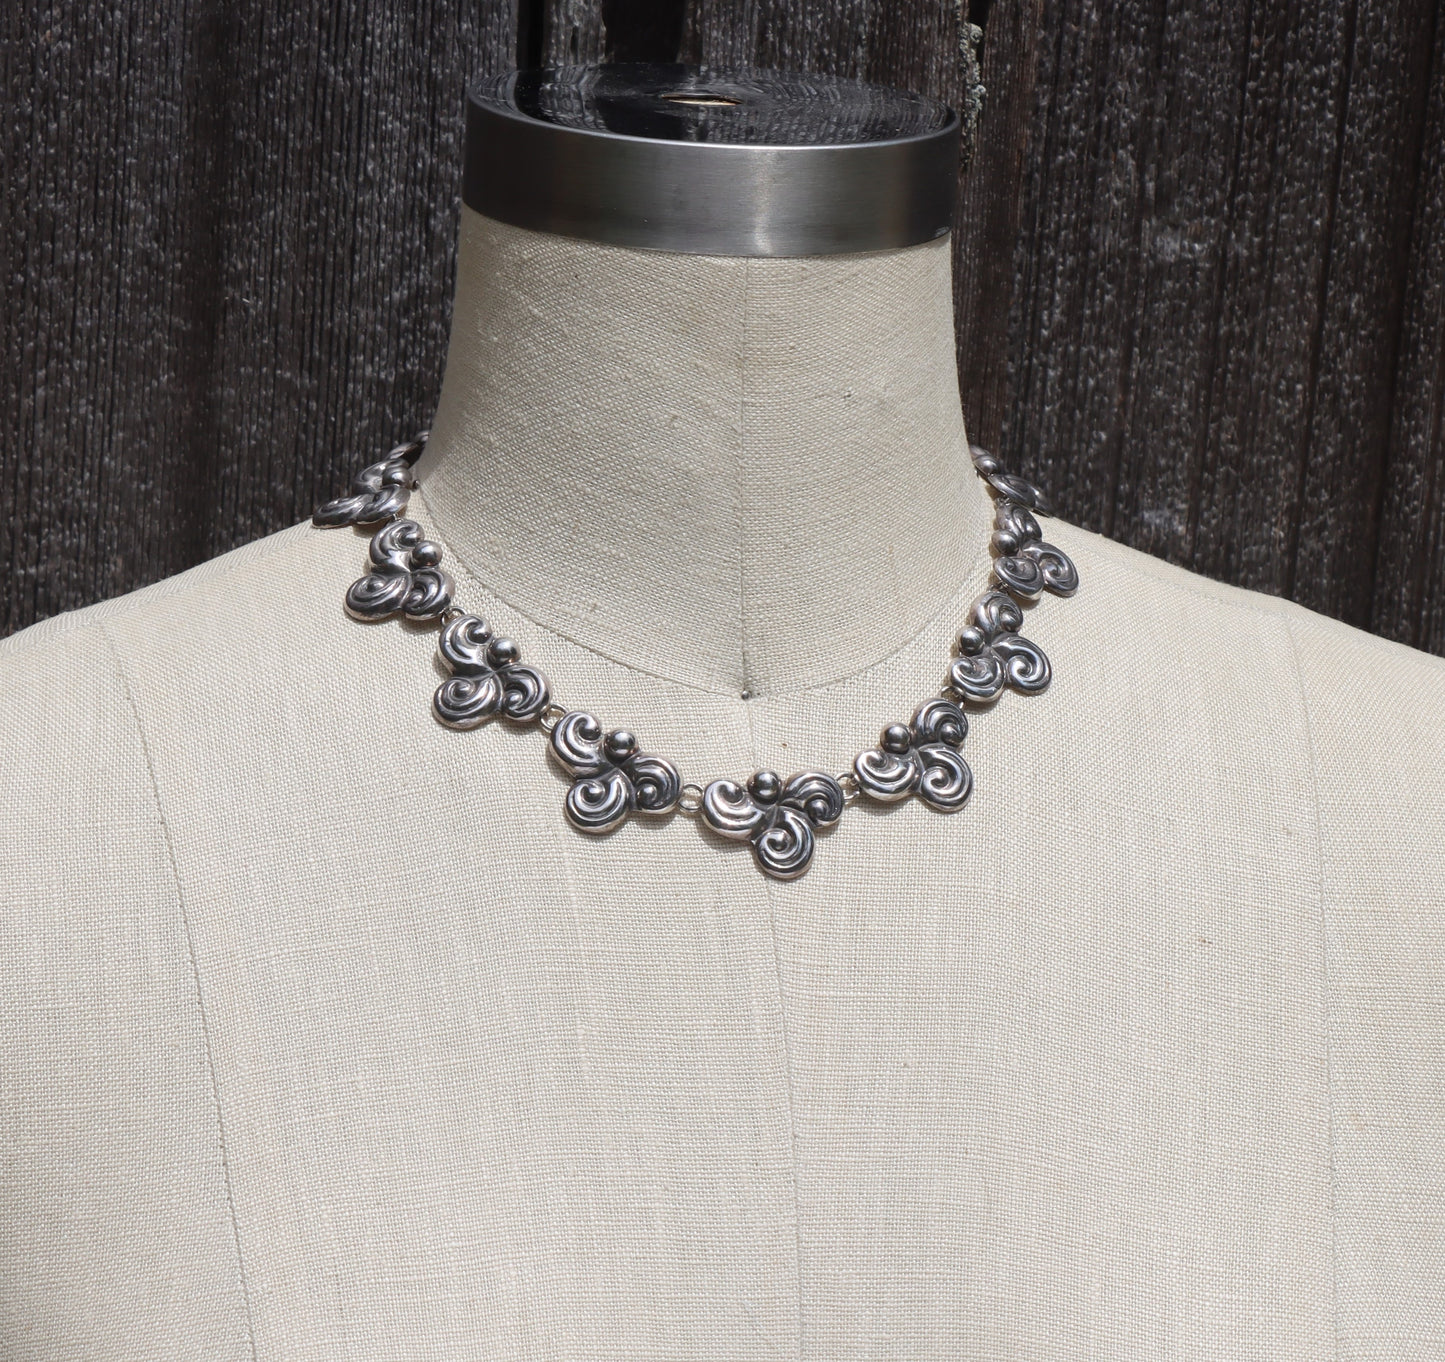 Vintage Taxco Mexico Sterling Silver Hollow Scroll Motif Fancy Link Chain Necklace